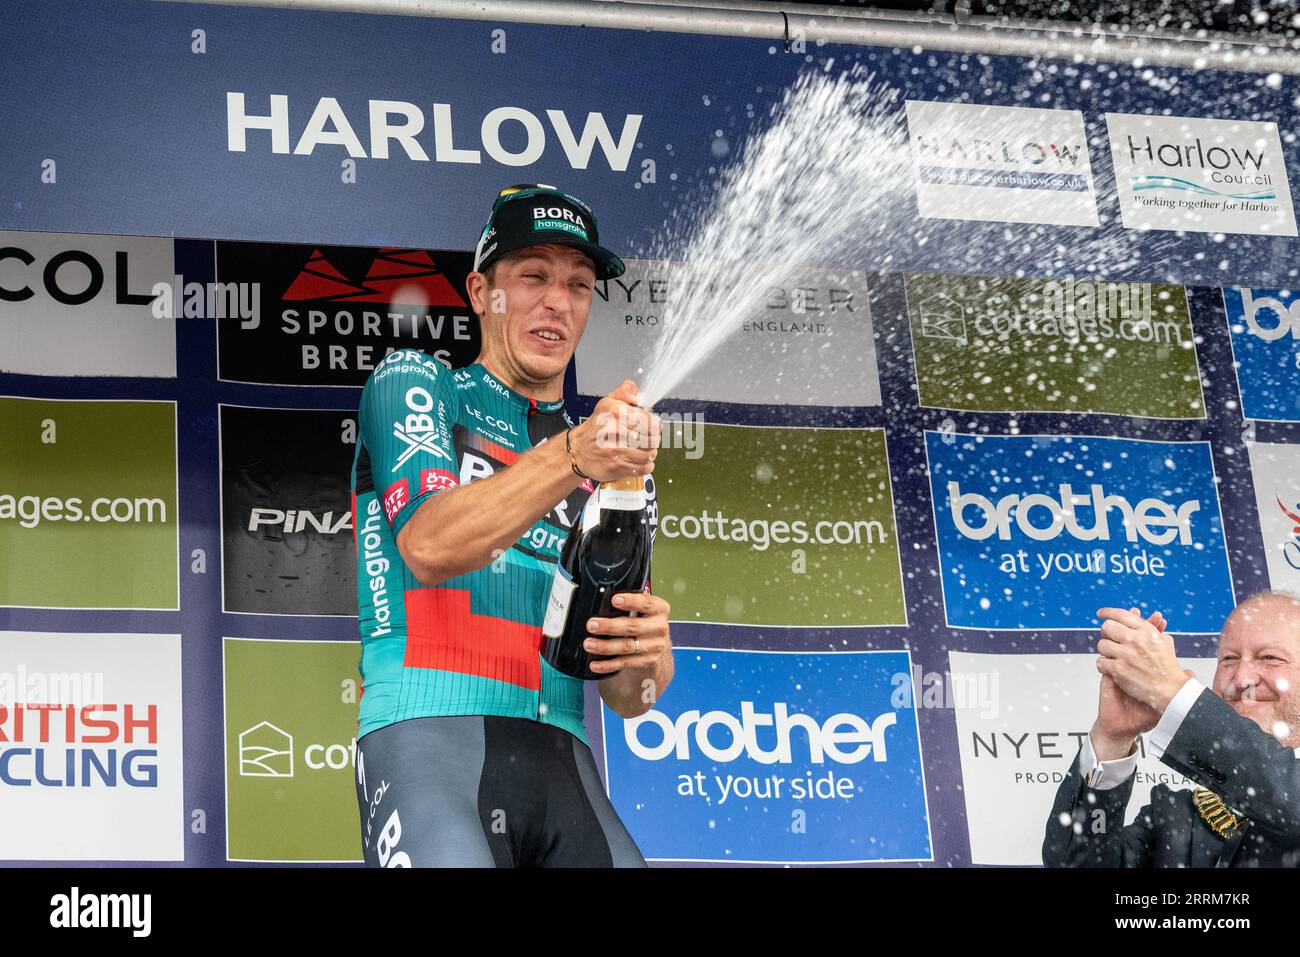 Winner Danny van Poppel celebrating at the Tour of Britain cycle race Stage 6 at the finish in Harlow, Essex, UK. Spraying champagne on podium Stock Photo